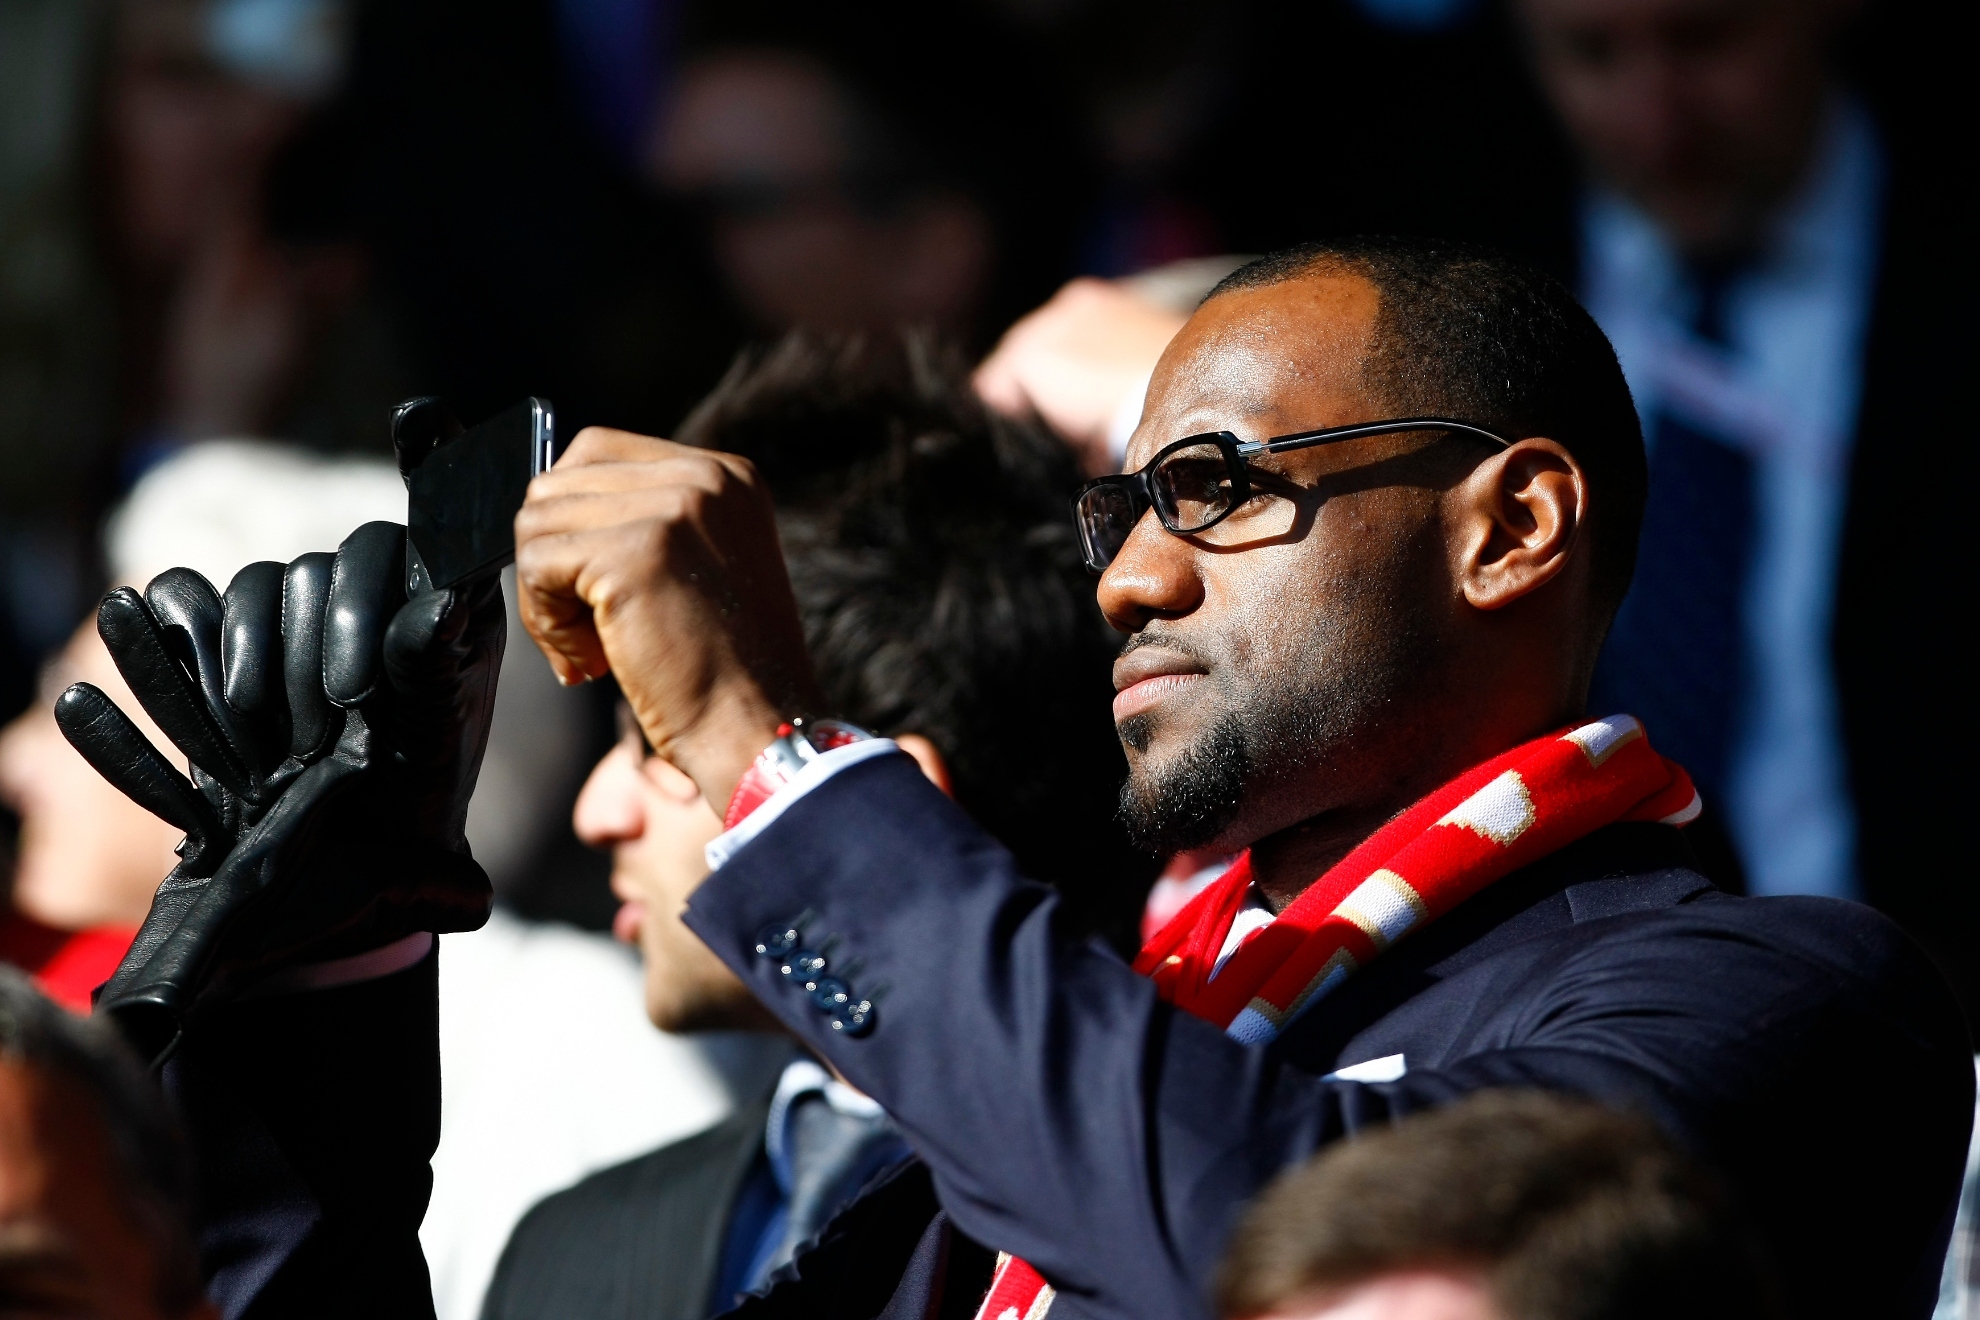 LeBron James enjoying a Liverpool game at Anfield